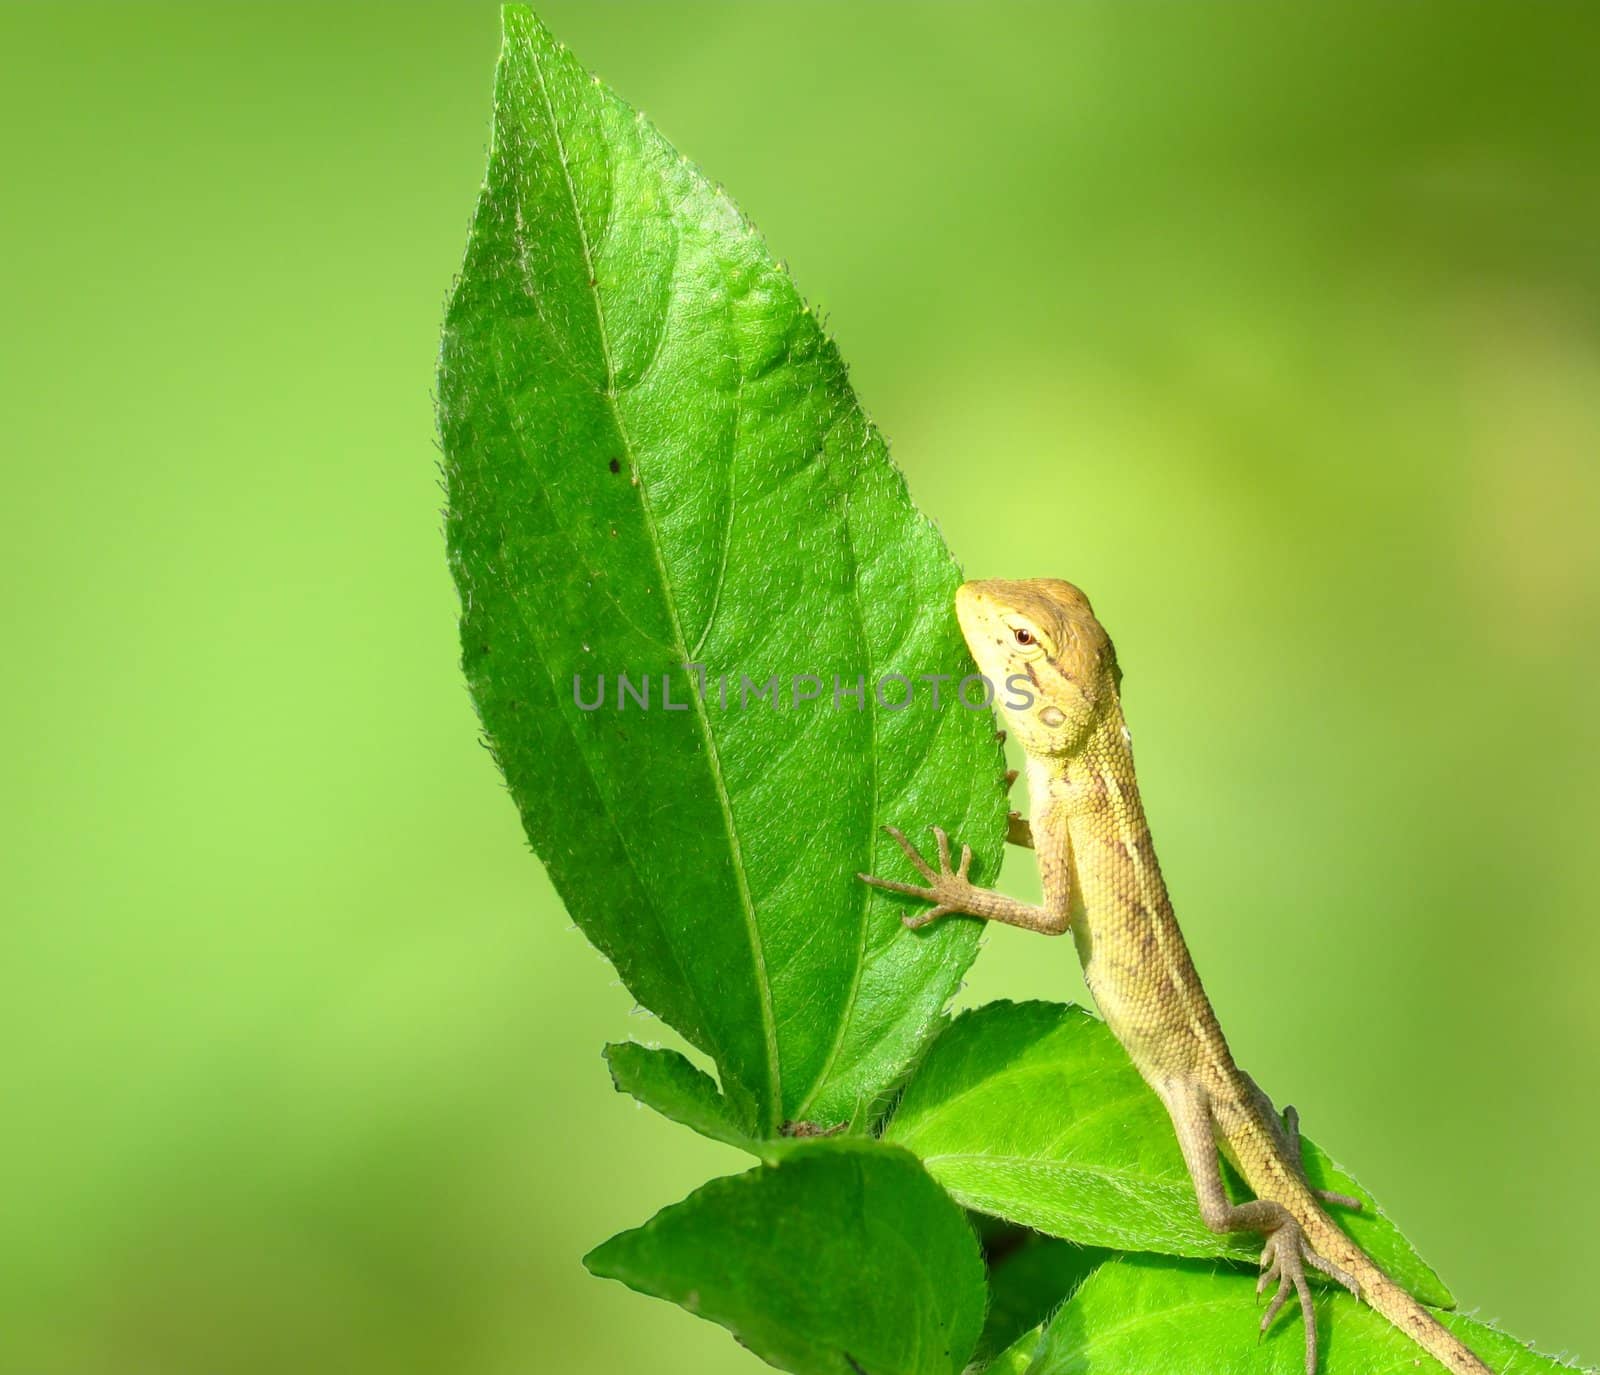 Baby chameleon holding a leaf by lkant